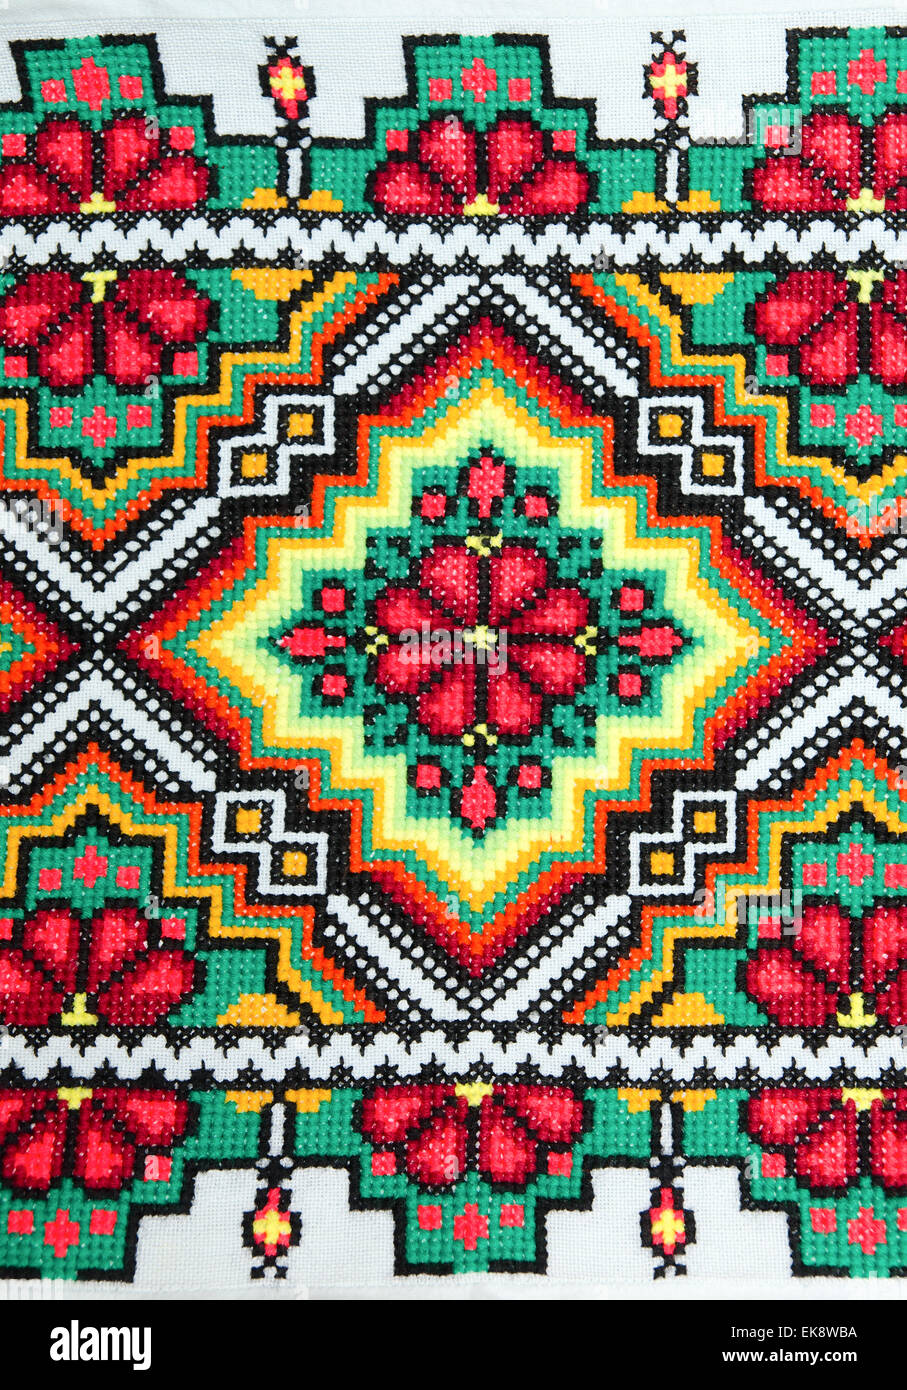 Fragment Of Fabric With Traditional Handmade Wooden Cross Stitch Embroidery  Frame, Floral Ornament Stock Photo, Picture and Royalty Free Image. Image  64685622.